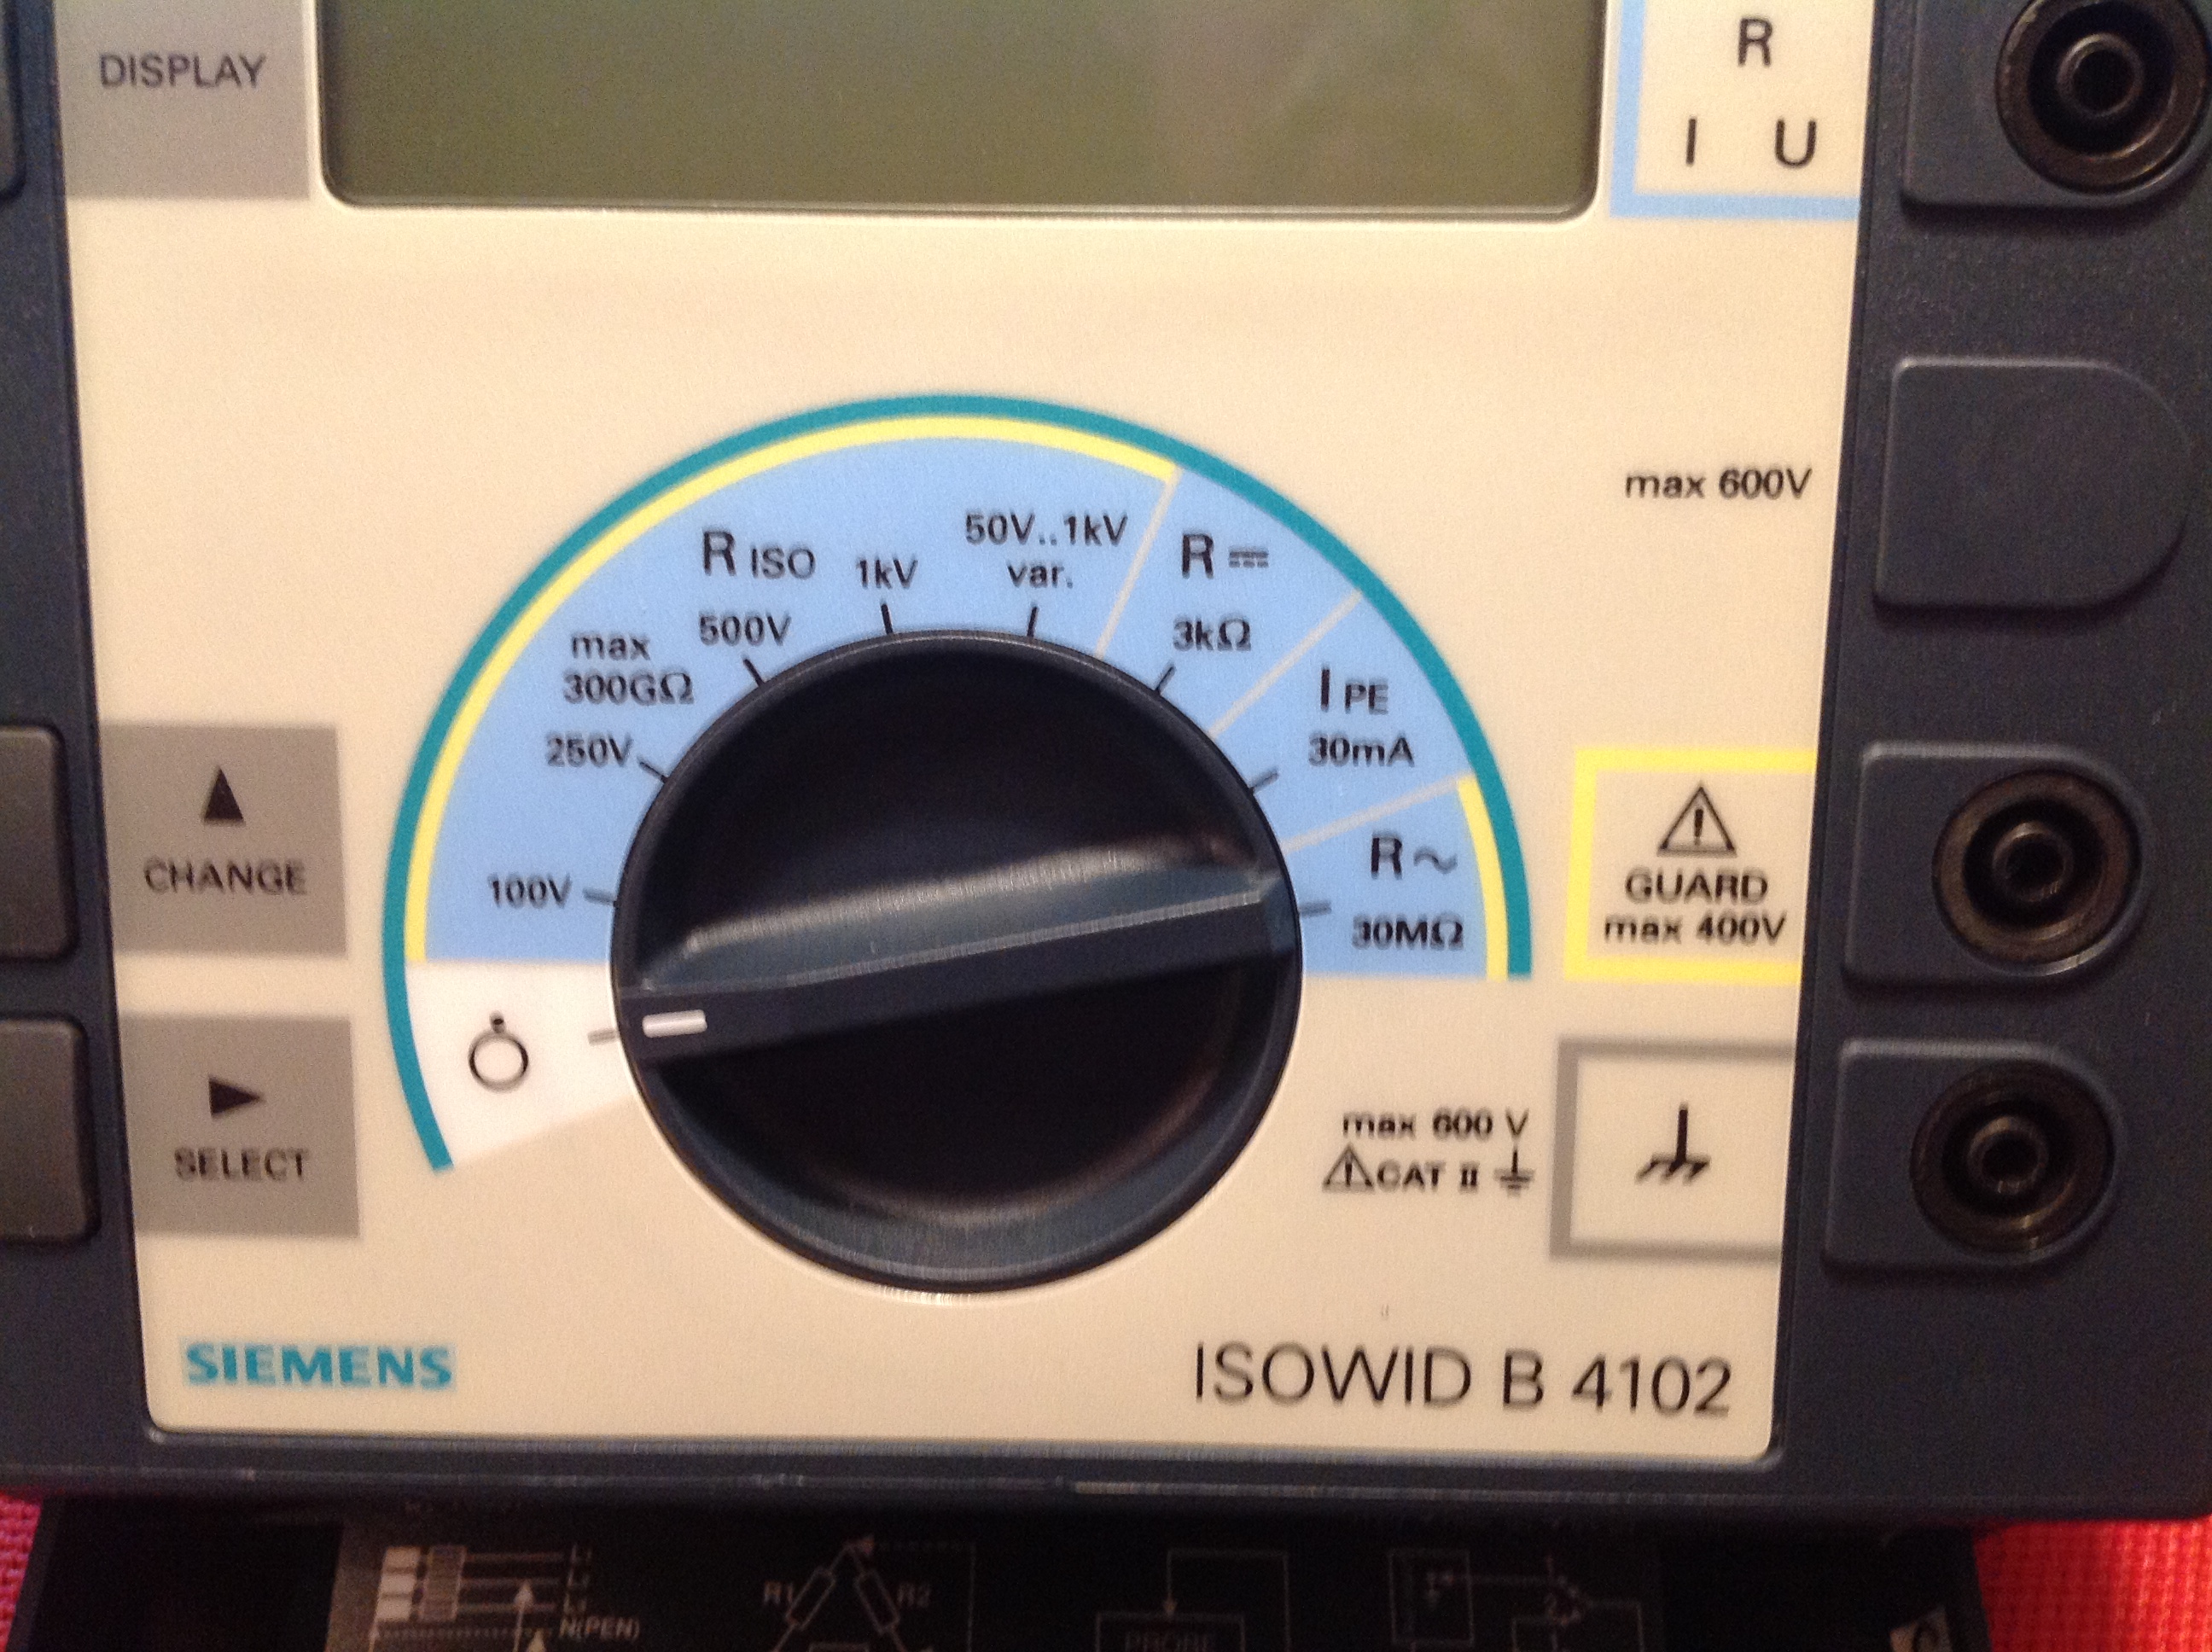 Siemens Isolationsmesser Isowid B4101